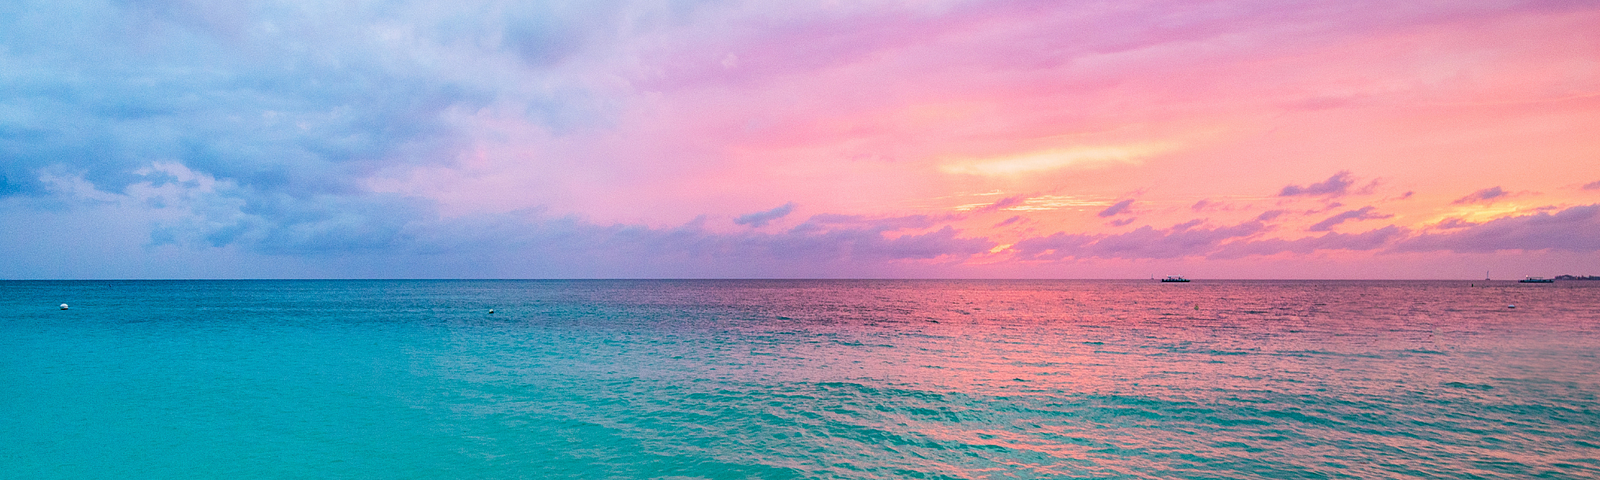 sunrise across a green ocean at the beach with a mix of pink and blue skies and clouds